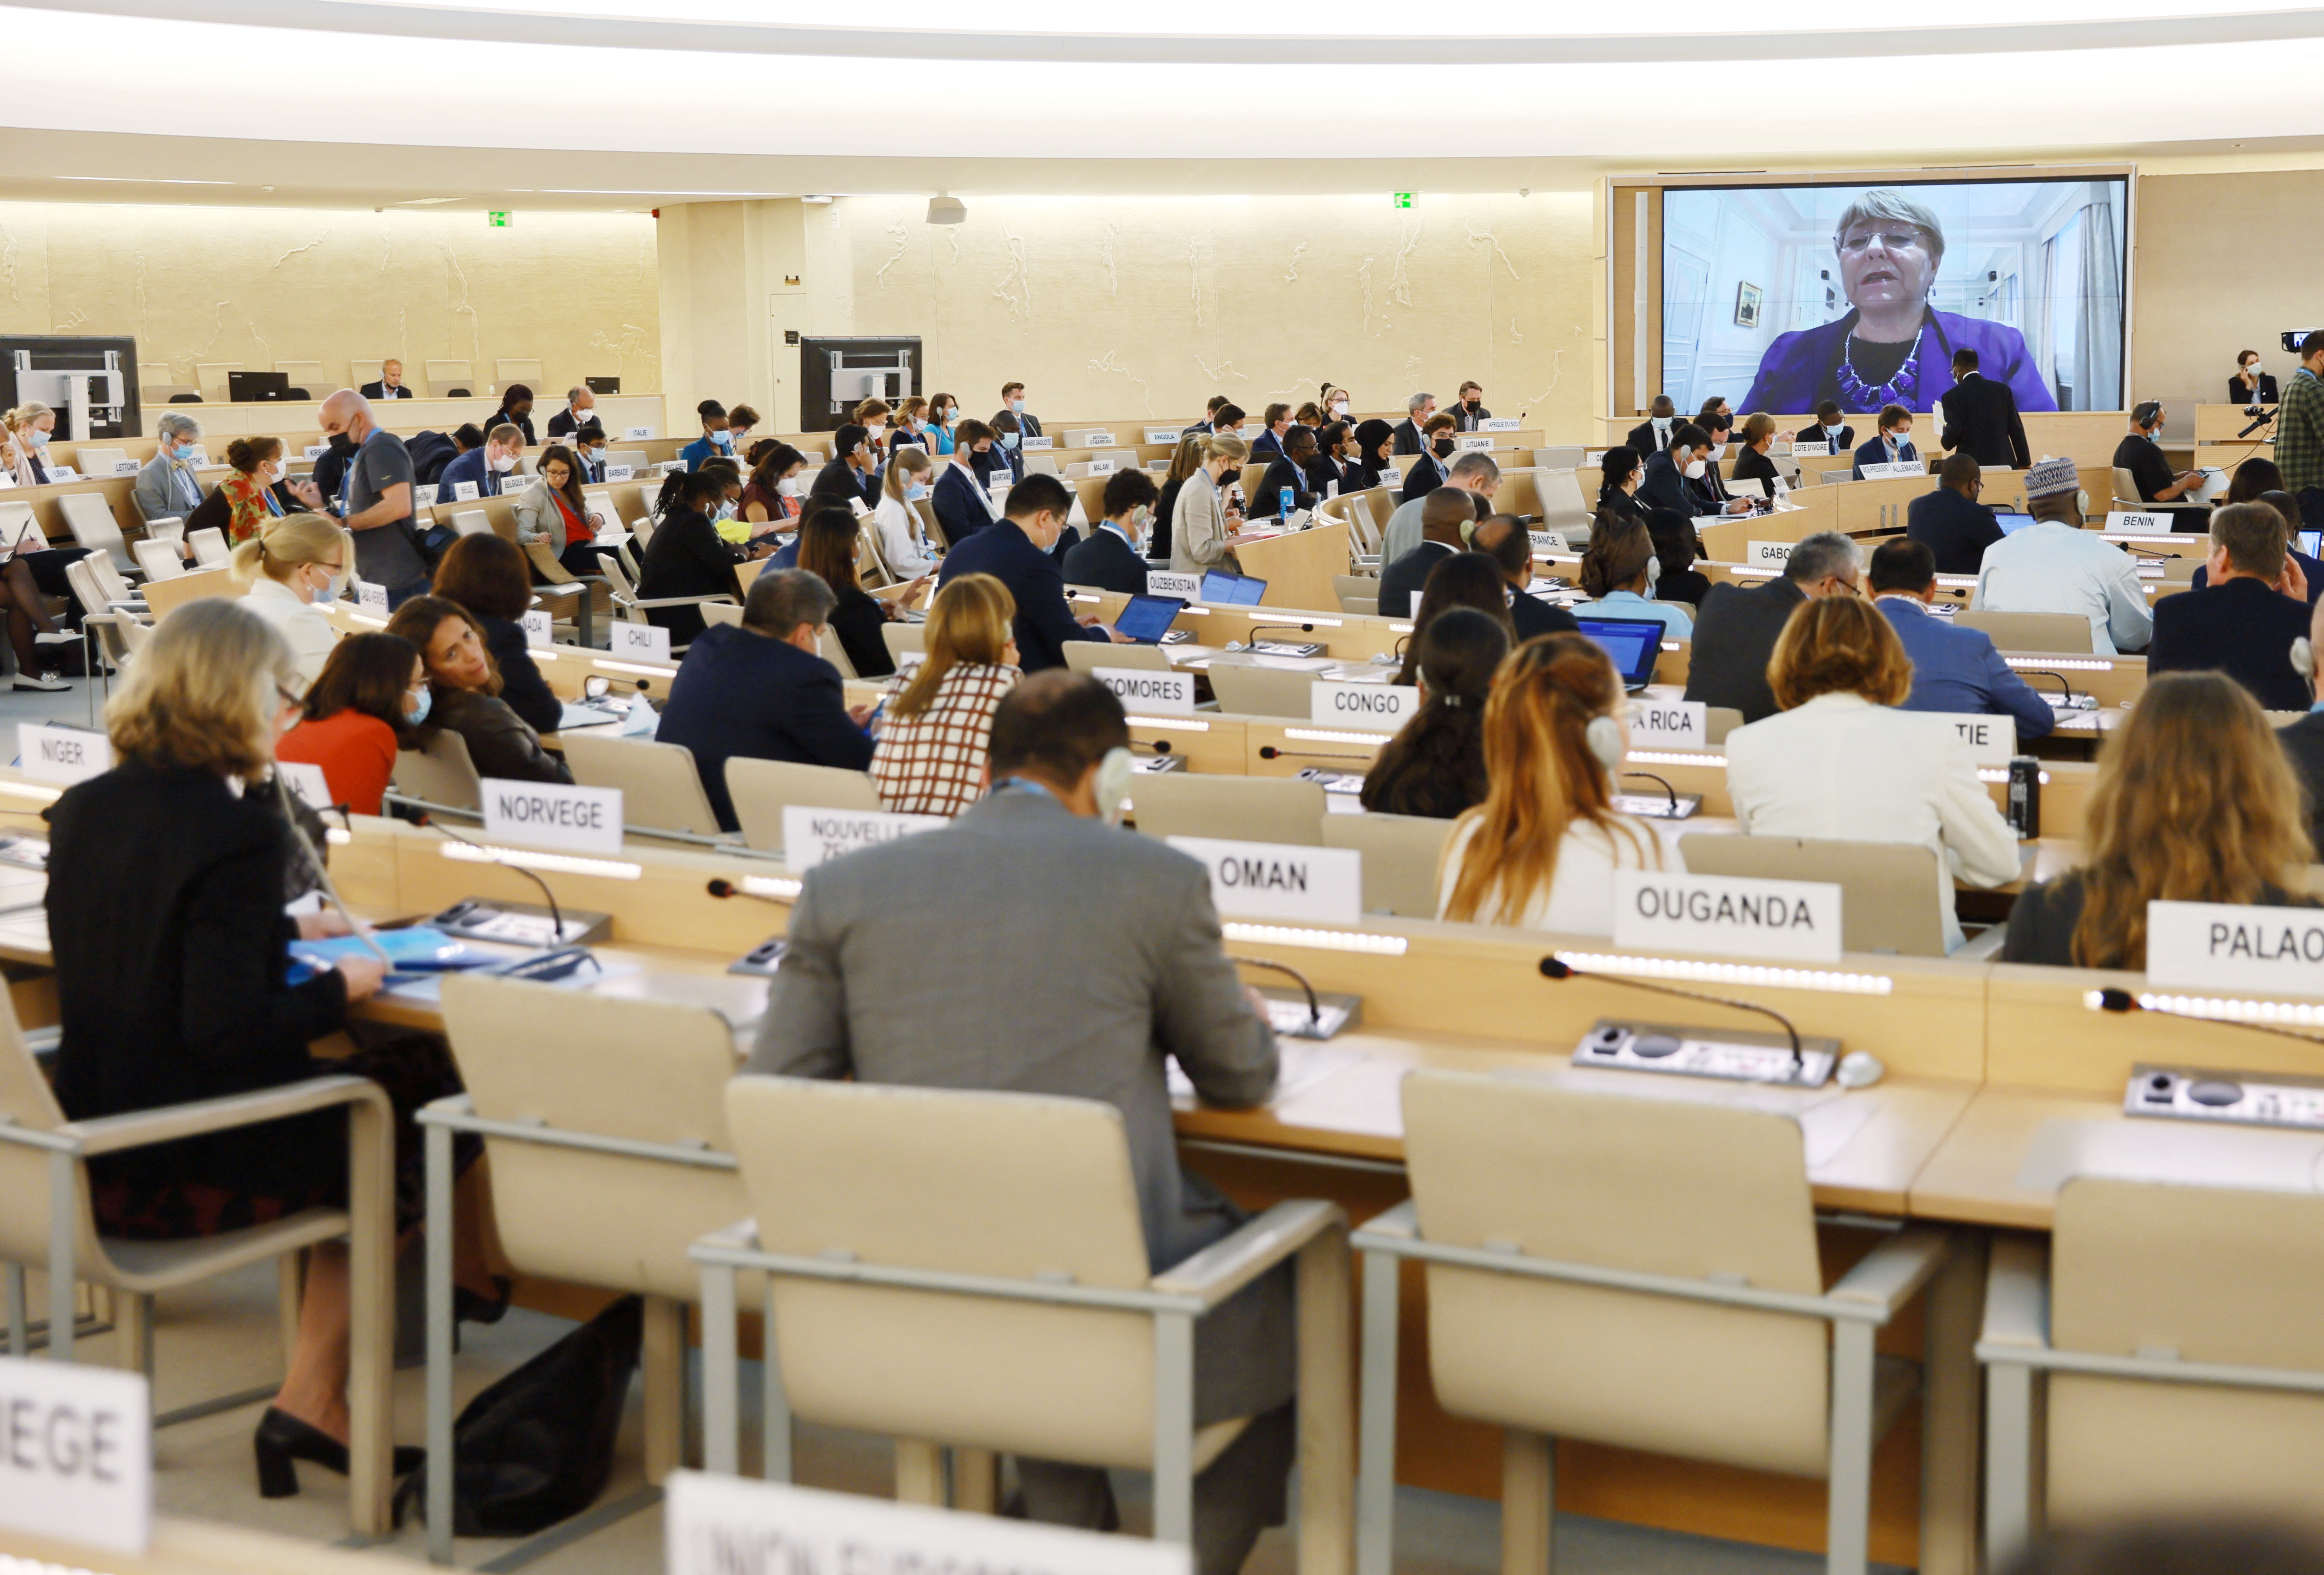 Michelle Bachelet, United Nations High Commissioner for Human Rights, appears on a screen during her video address at the Human Rights Council special session on the situation of human rights in Ukraine, at the United Nations in Geneva, Switzerland , on May 12, 2022. REUTERS/Denis Balibouse